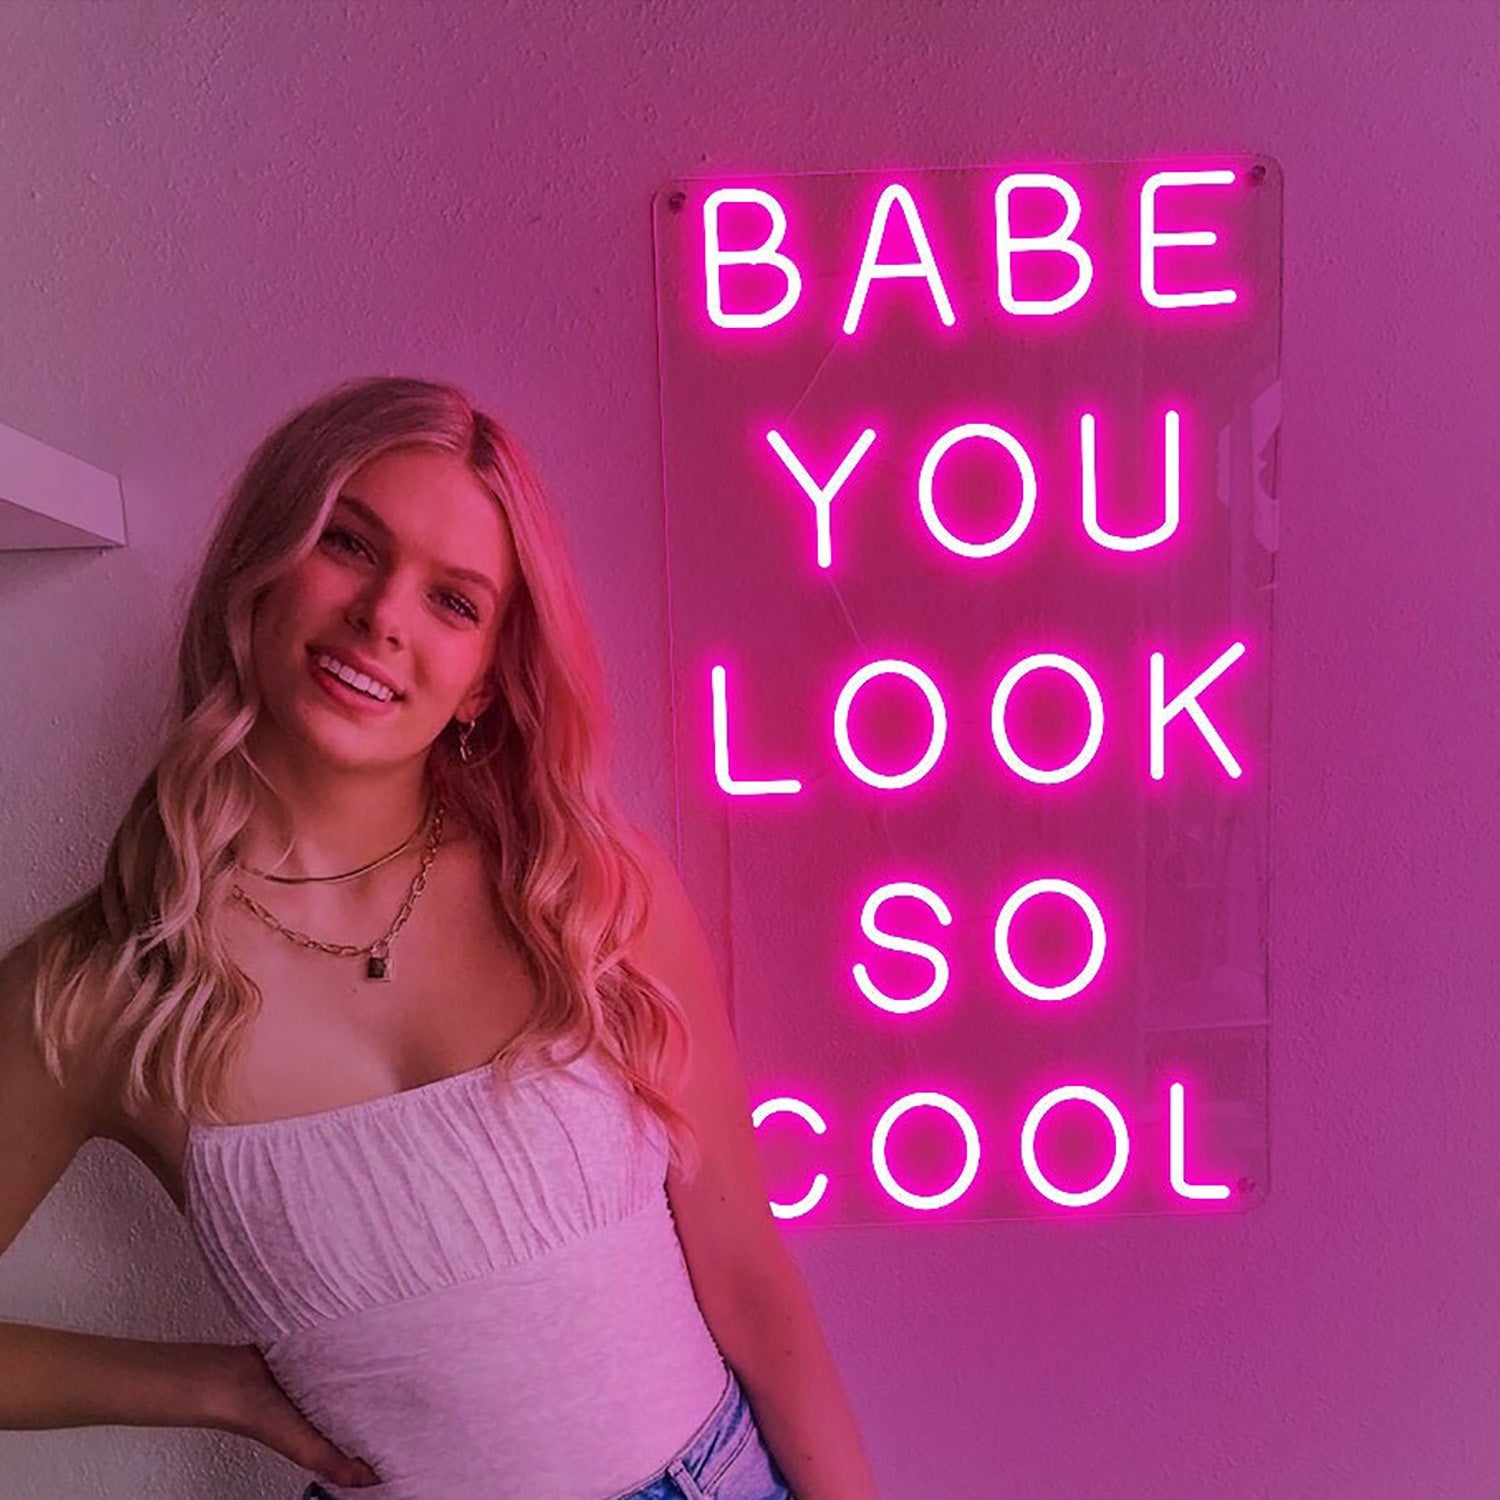 NEONIP-100% Handmade Babe You Look So Cool LED Neon Light Sign